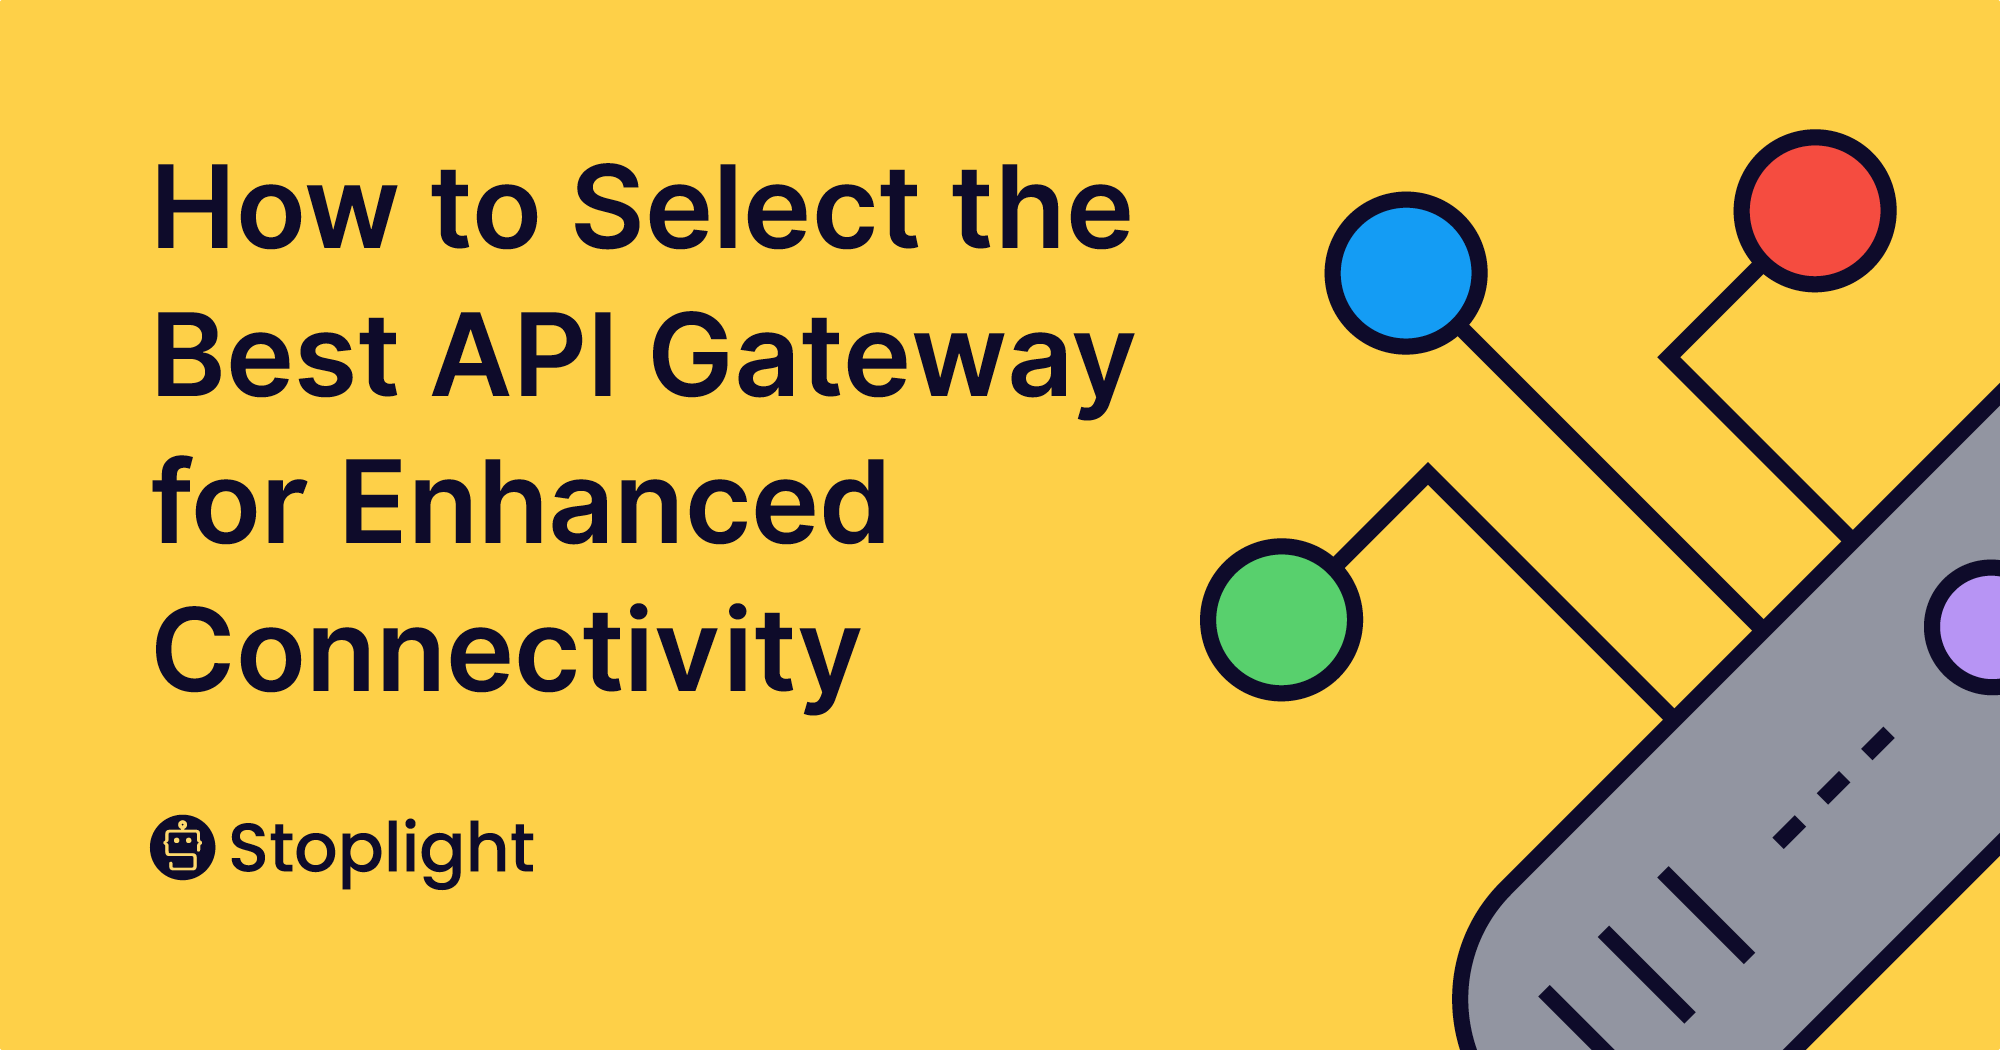 How to Select the Best API Gateway for Enhanced Connectivity